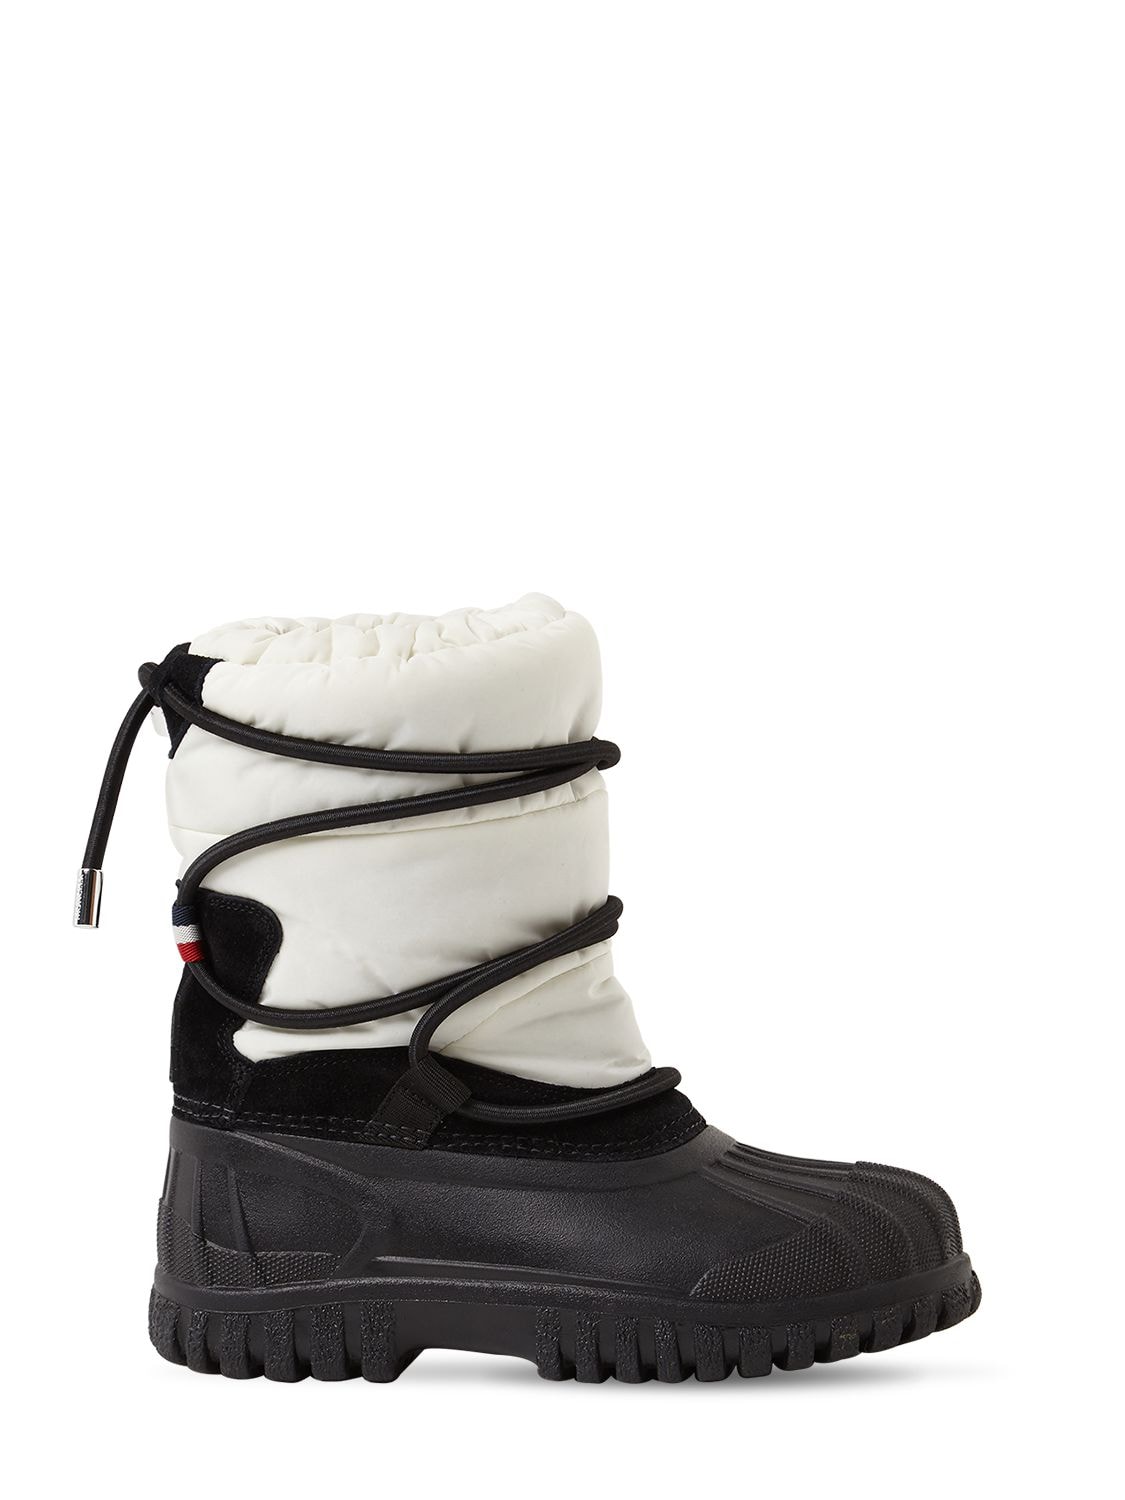 MONCLER RUBBER SKI BOOTS,72IIKM094-MDAY0